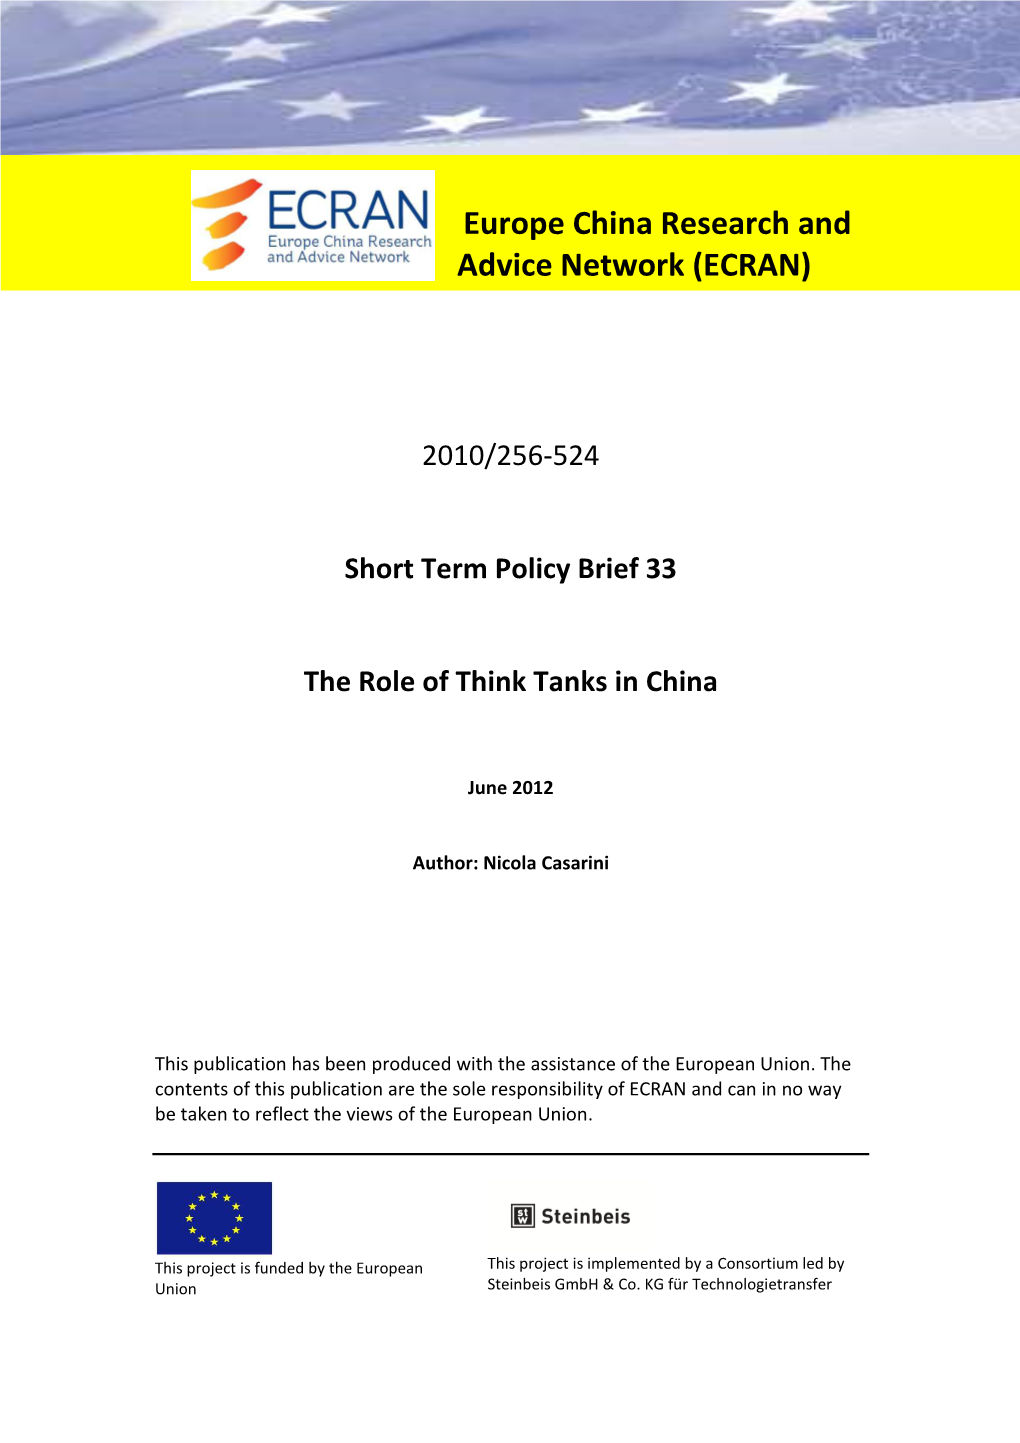 ECRAN IS37 Paper 33 the Role of Think Tanks in China, Nicola Casarini